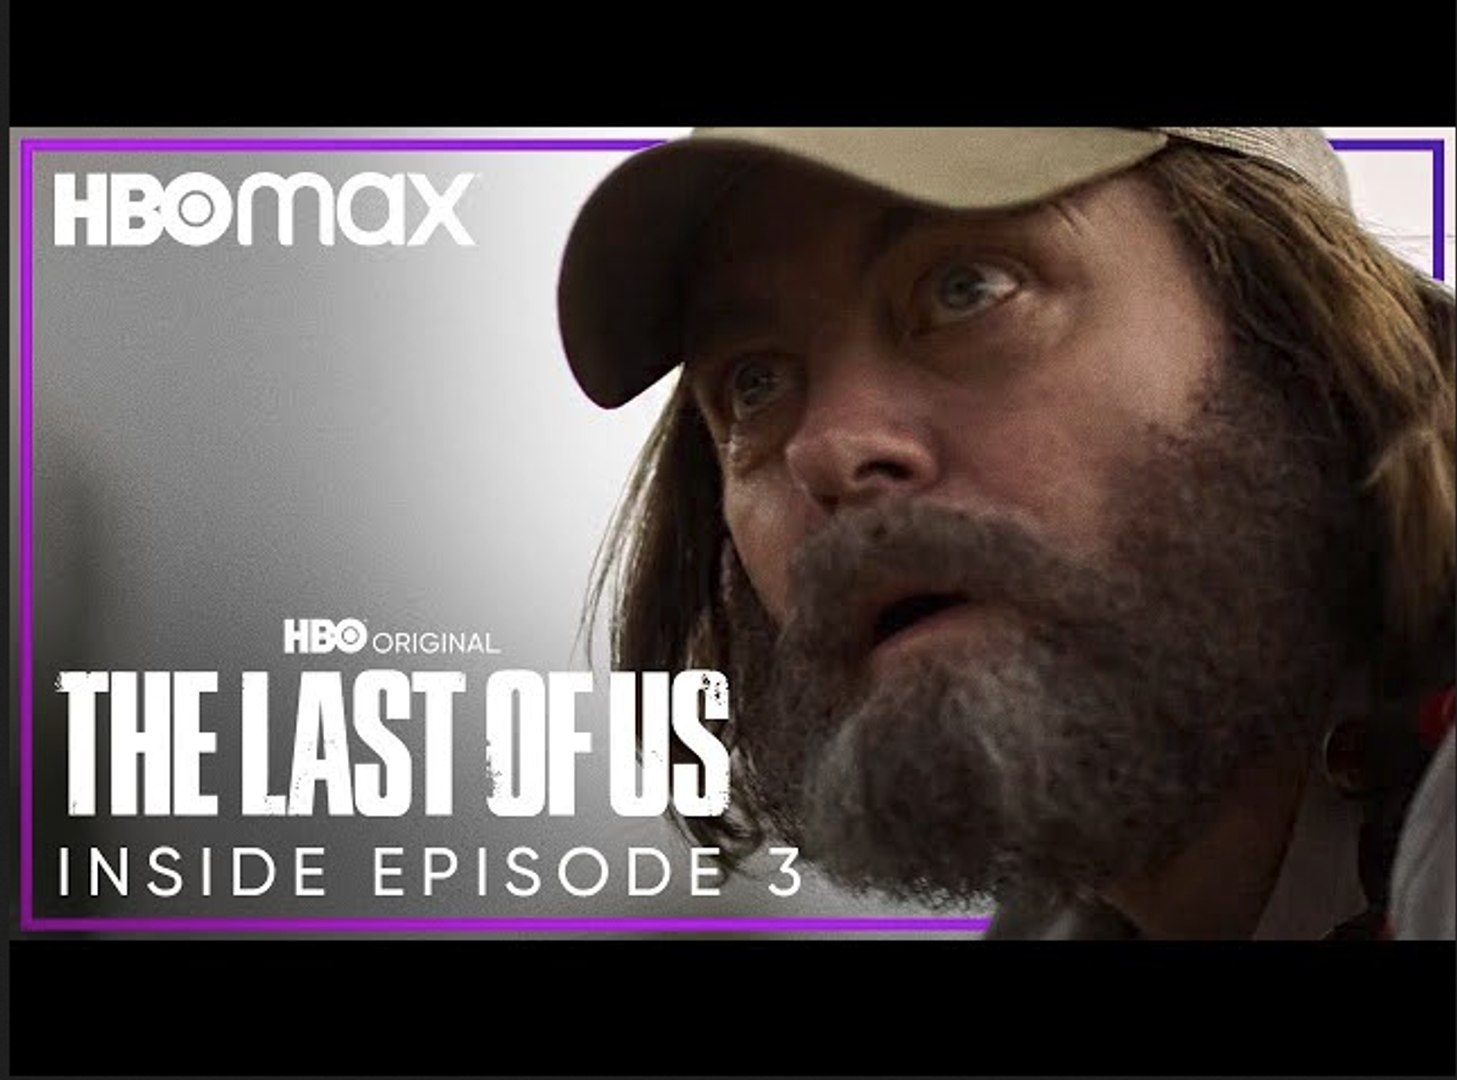 The Last of Us, EPISODE 3 NEW TRAILER